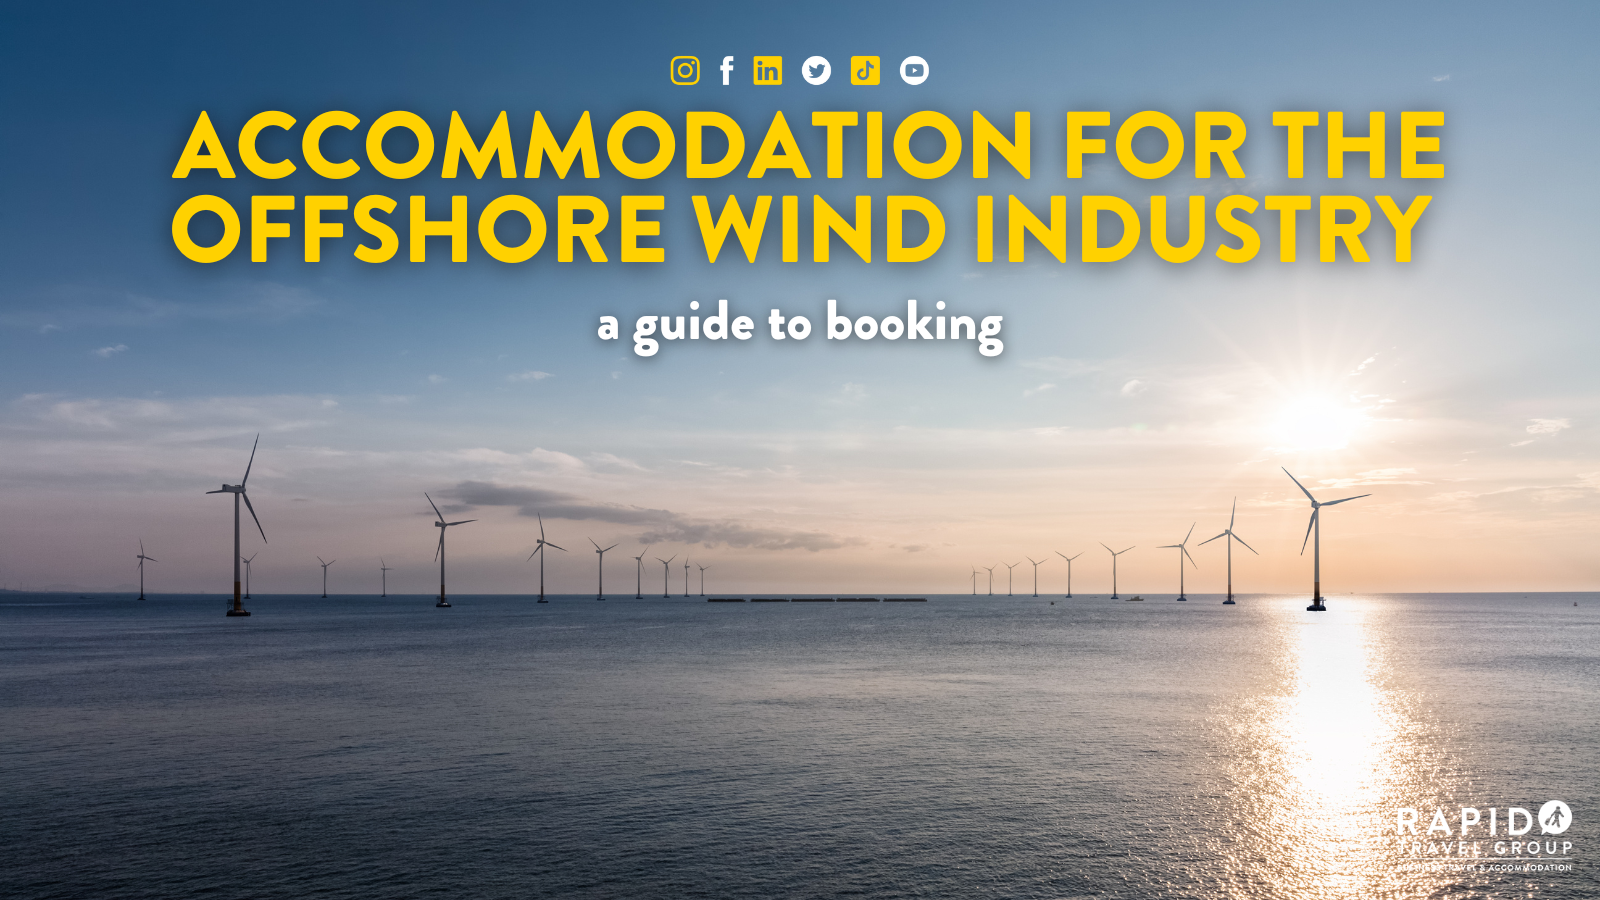 Accommodation for the offshore wind industry: a guide to booking